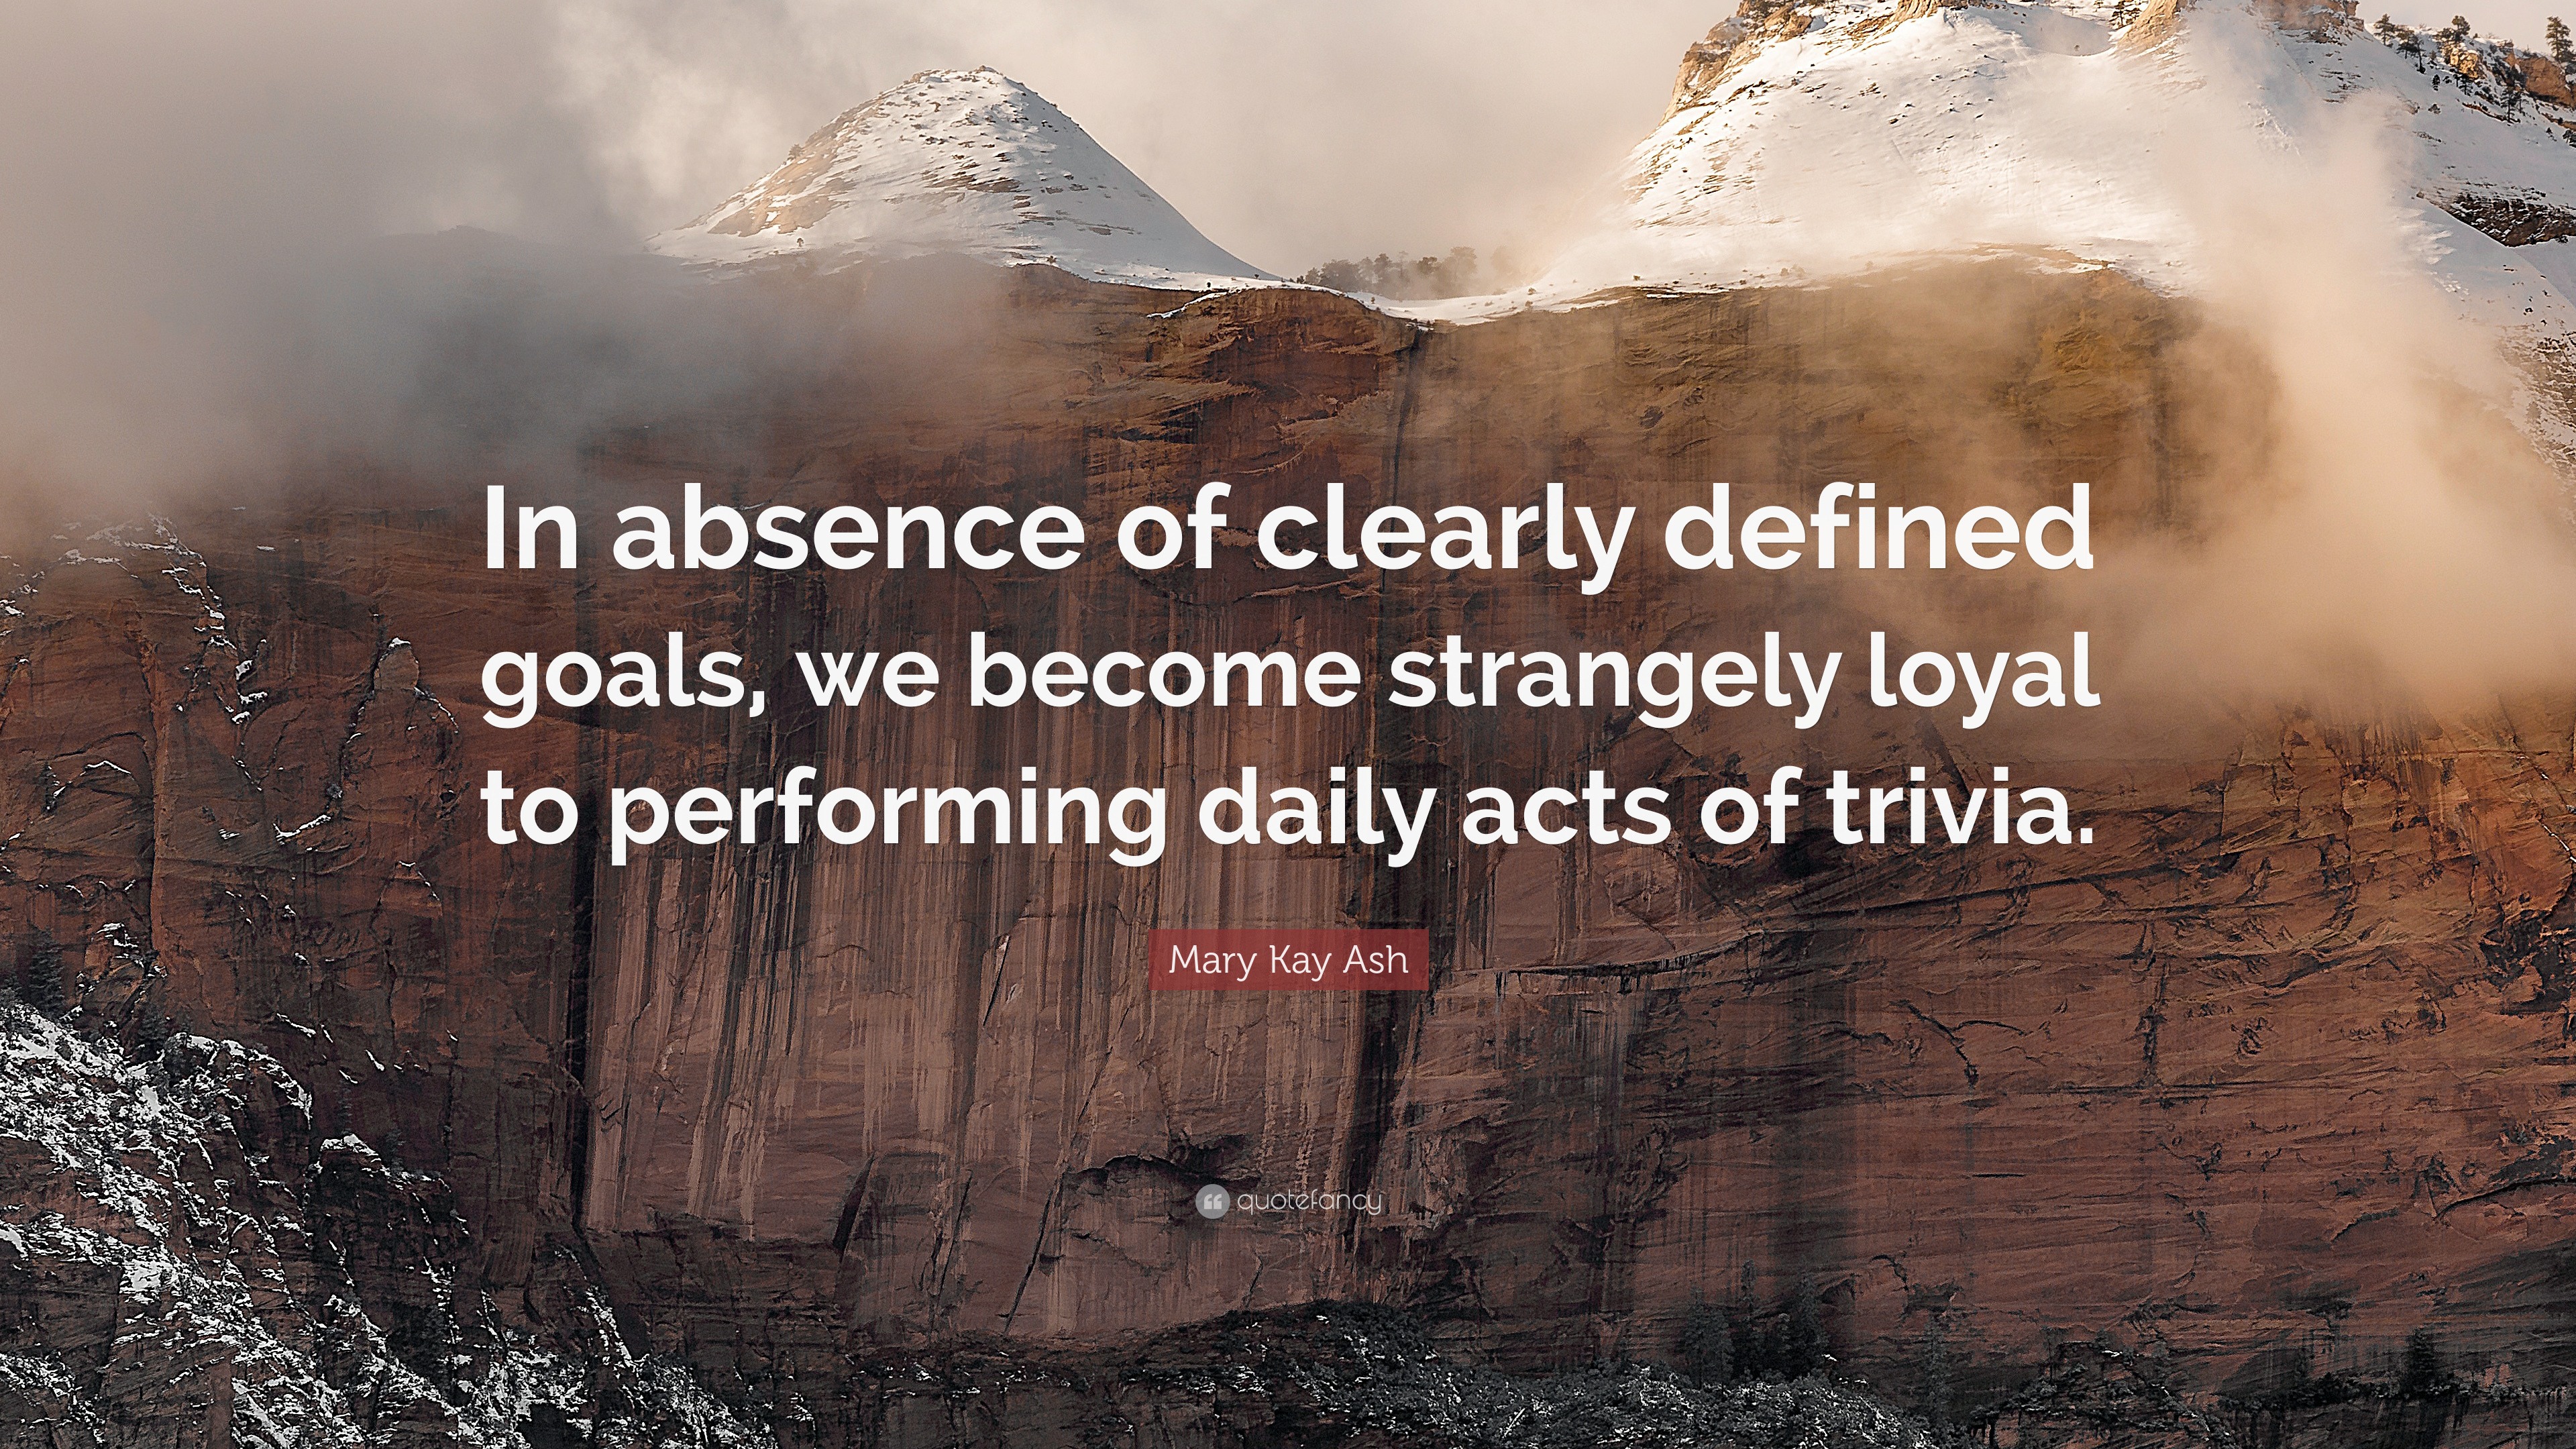 Mary Kay Ash Quote In Absence Of Clearly Defined Goals We Become Strangely Loyal To Performing